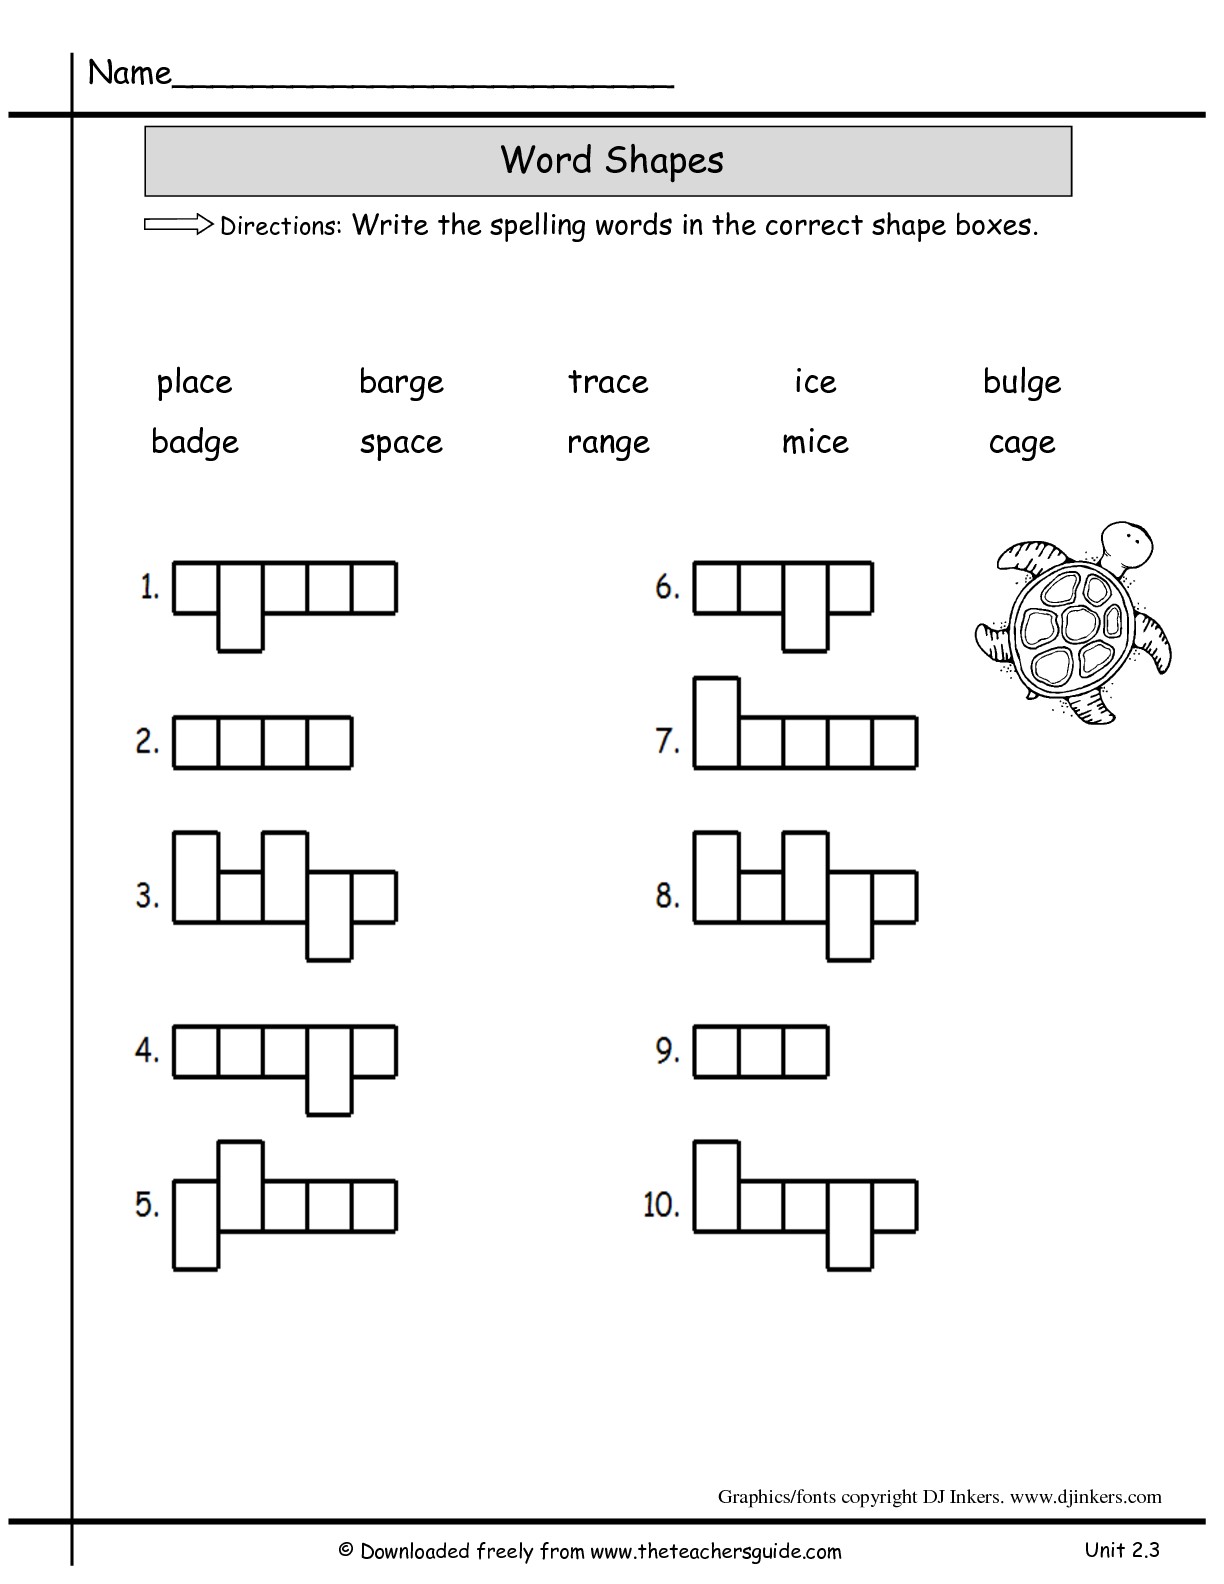 17 Best Images Of Prefix Suffix Worksheet Science Prefixes And Suffixes Worksheets 4th Grade